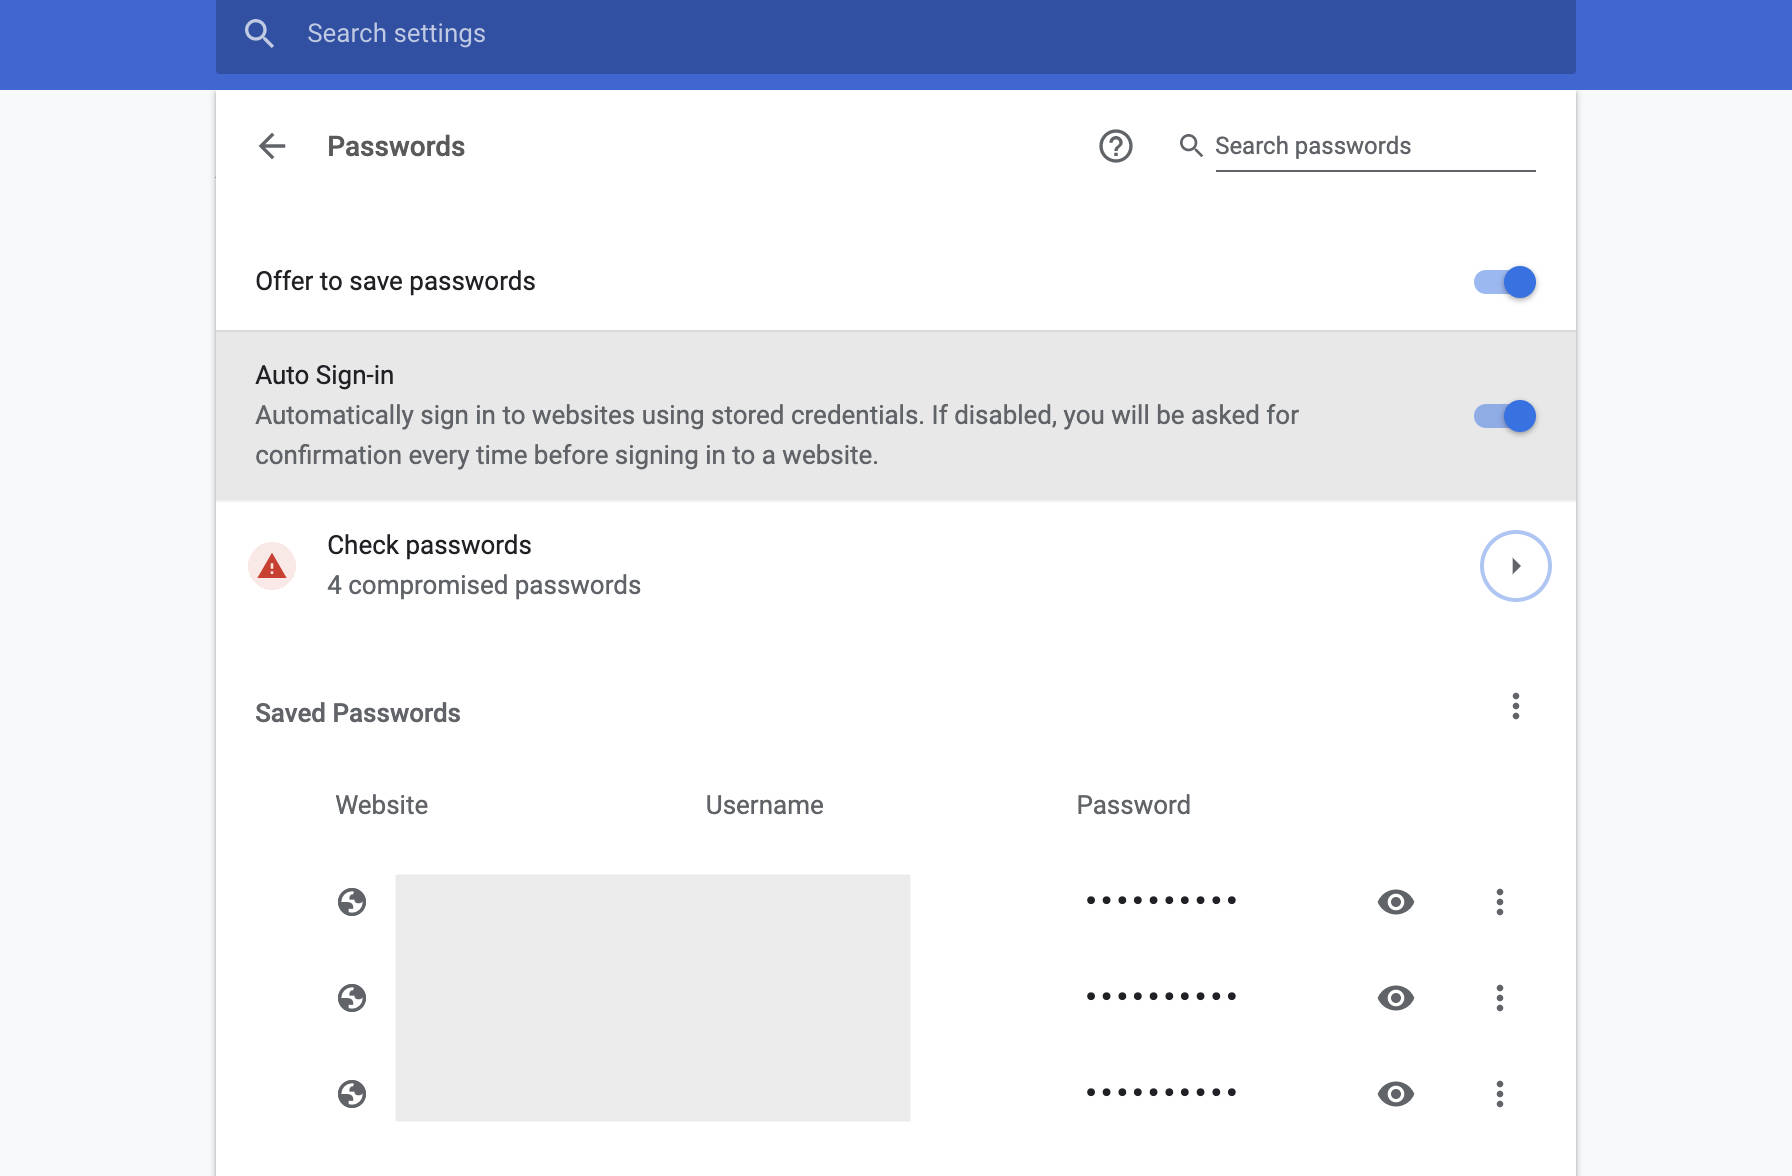 Chrome Compromised Passwords Warning